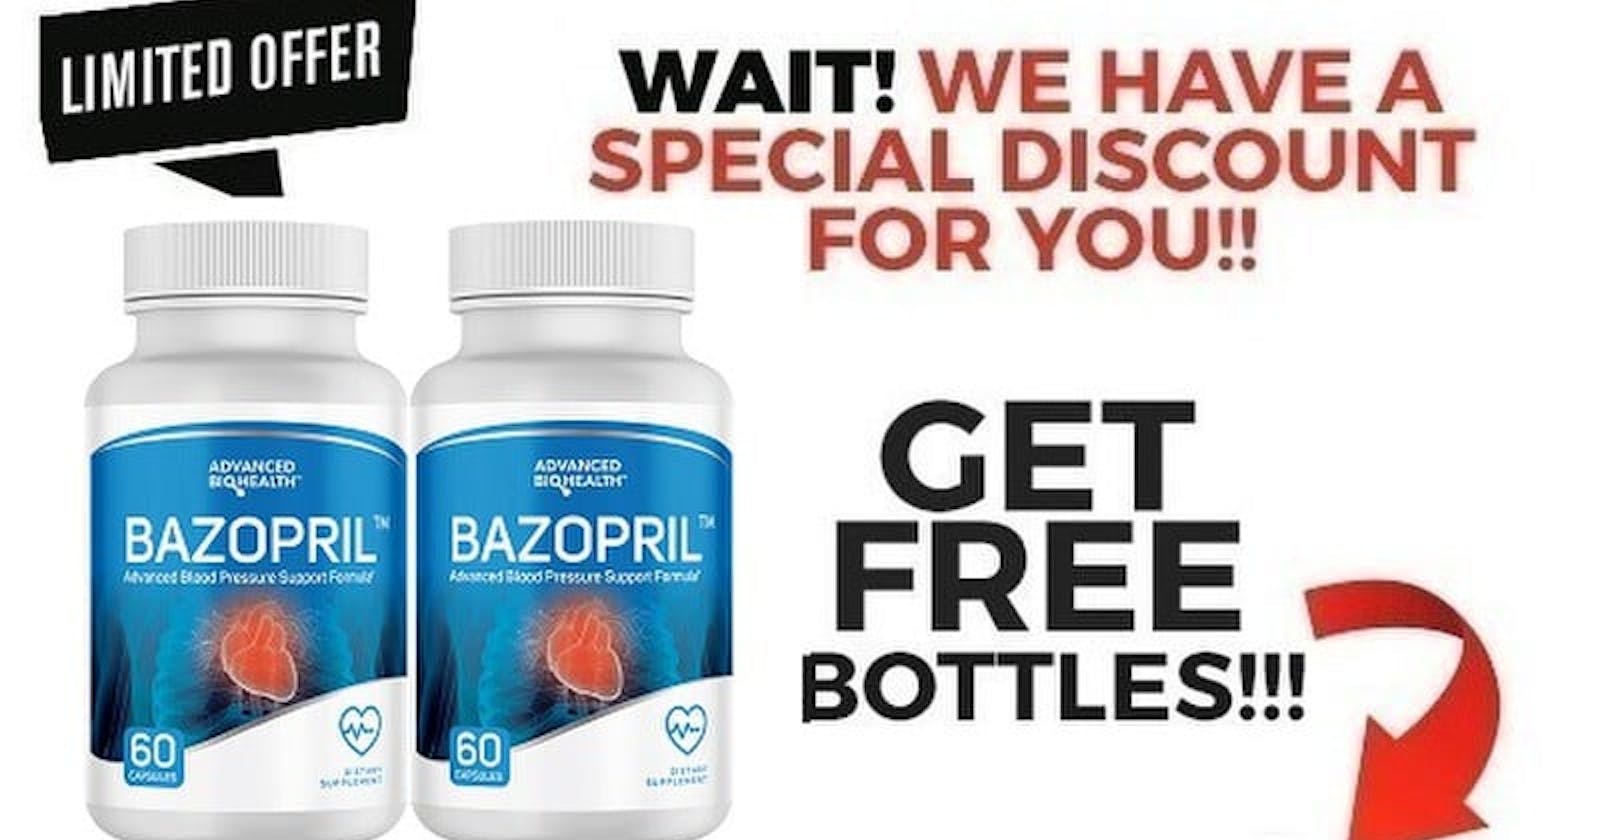 Bazopril (Review) Uses the Benefit Ingredient and More! Read